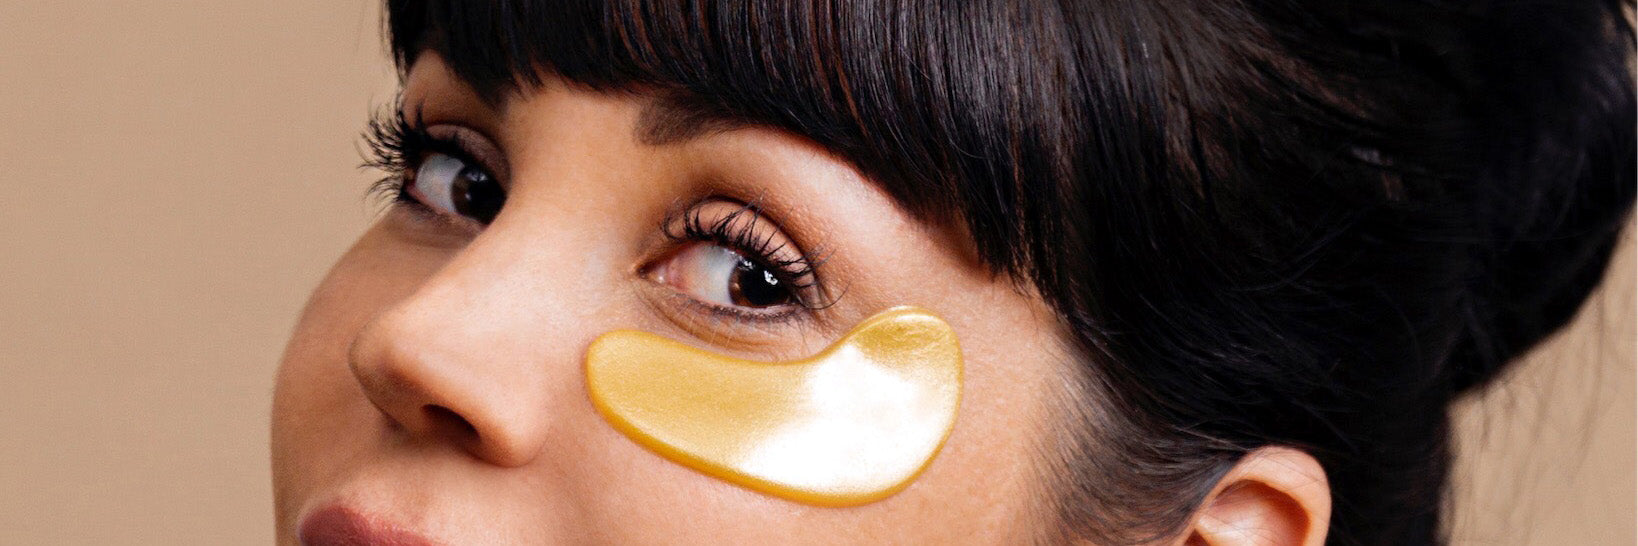 InStyle: Halle Berry “Loves” This $17 Eye Mask From a Pamela Anderson-Used Brand.